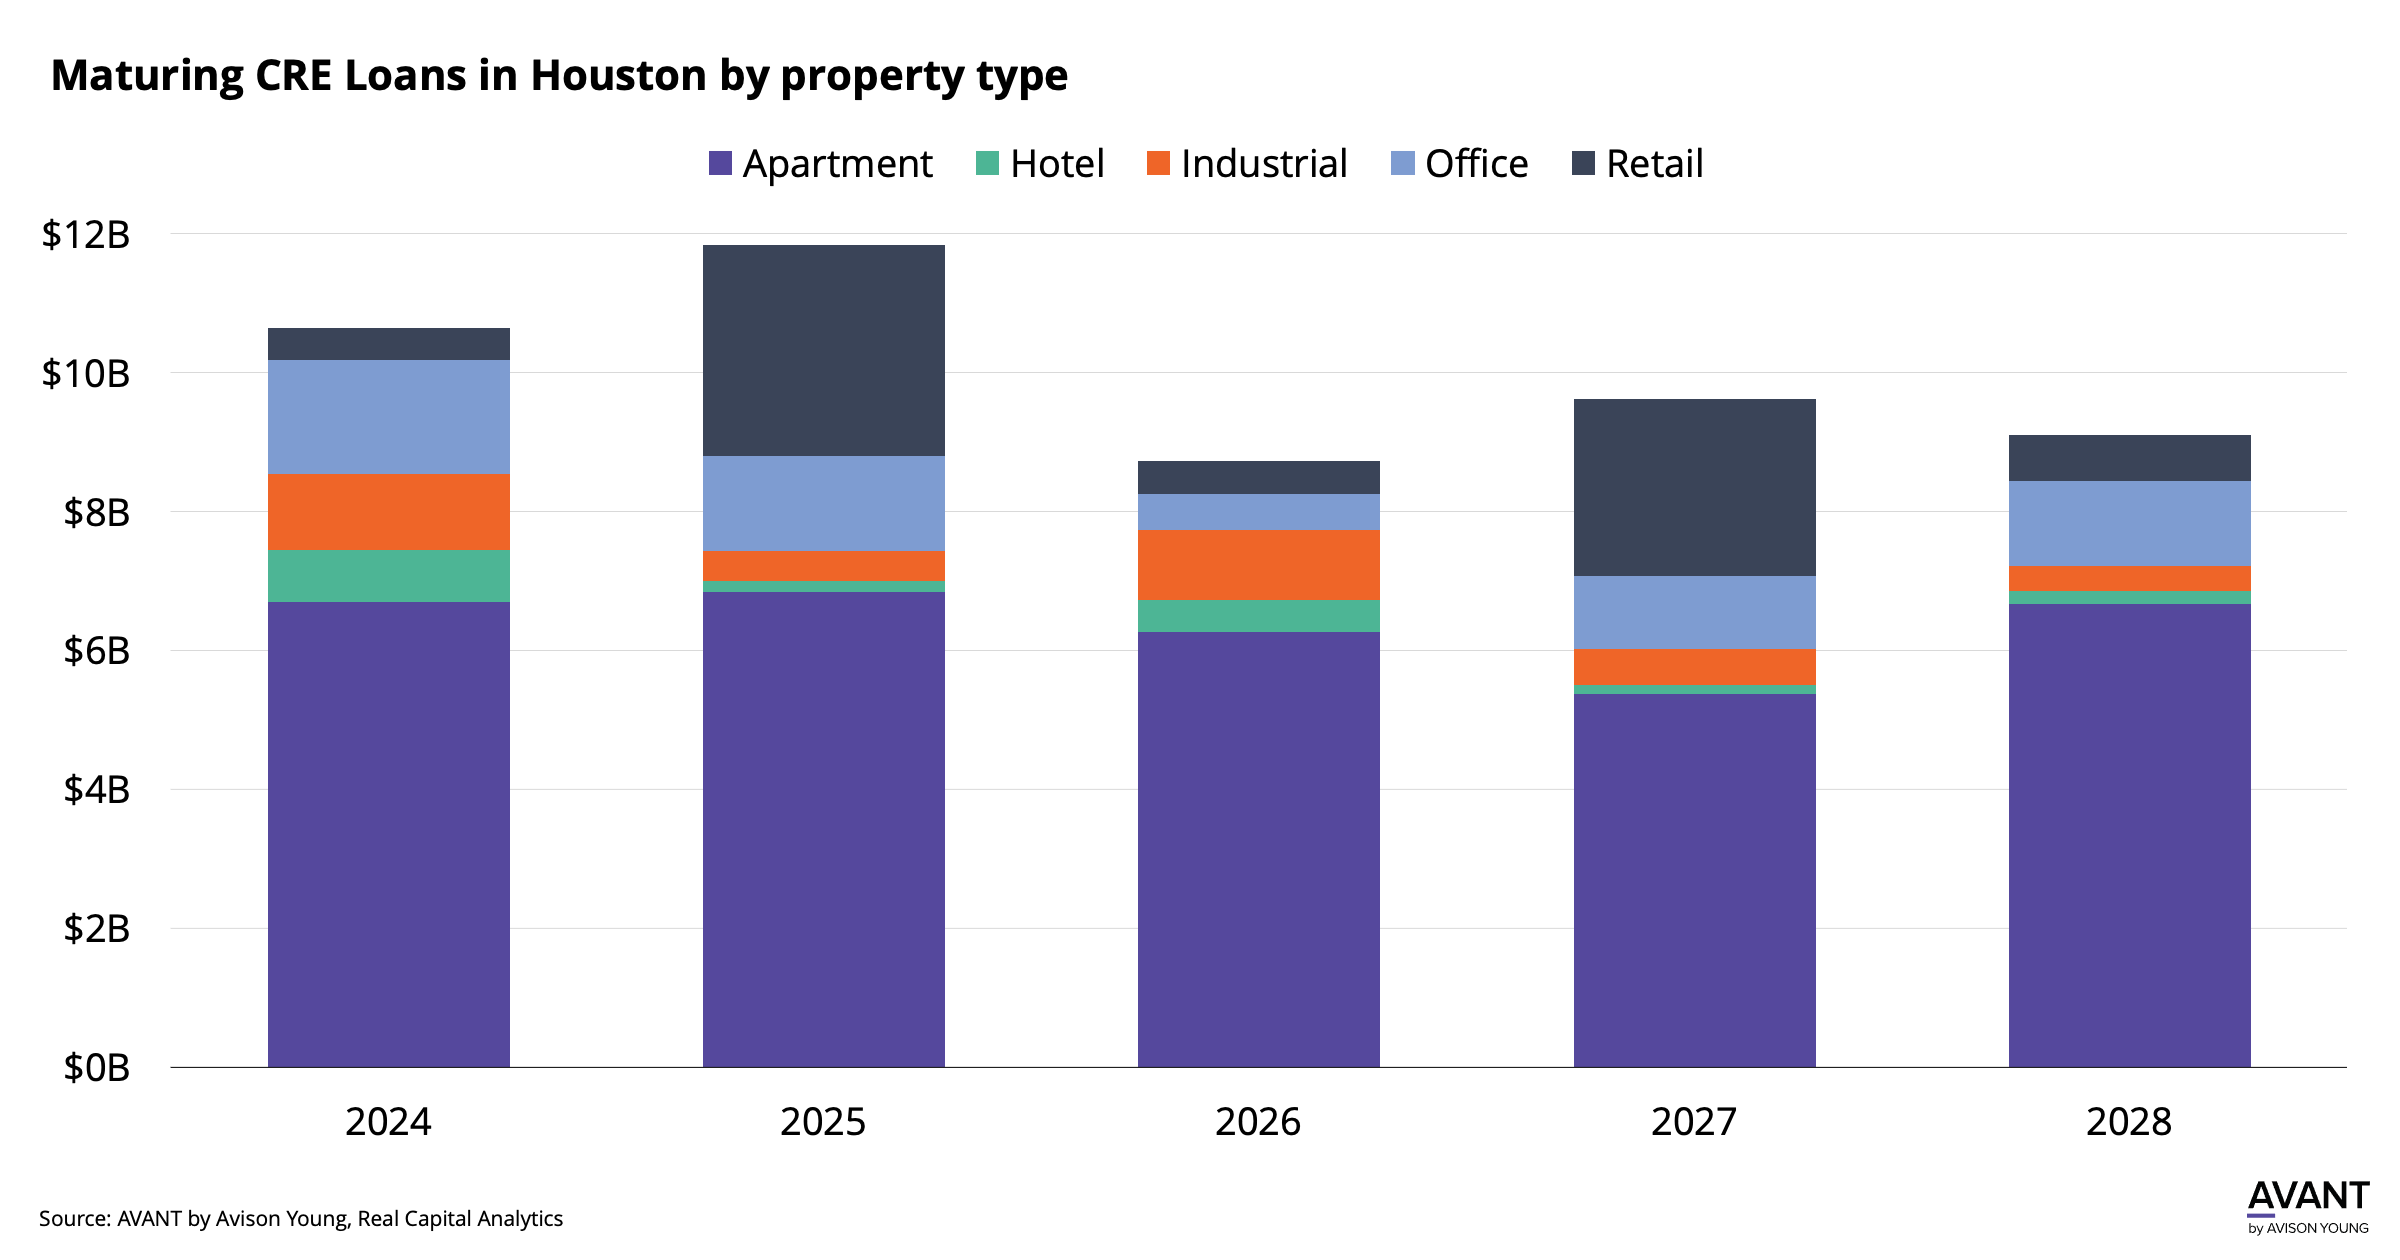 Maturing CRE Loans in Houston by property type from 2024 to 2028